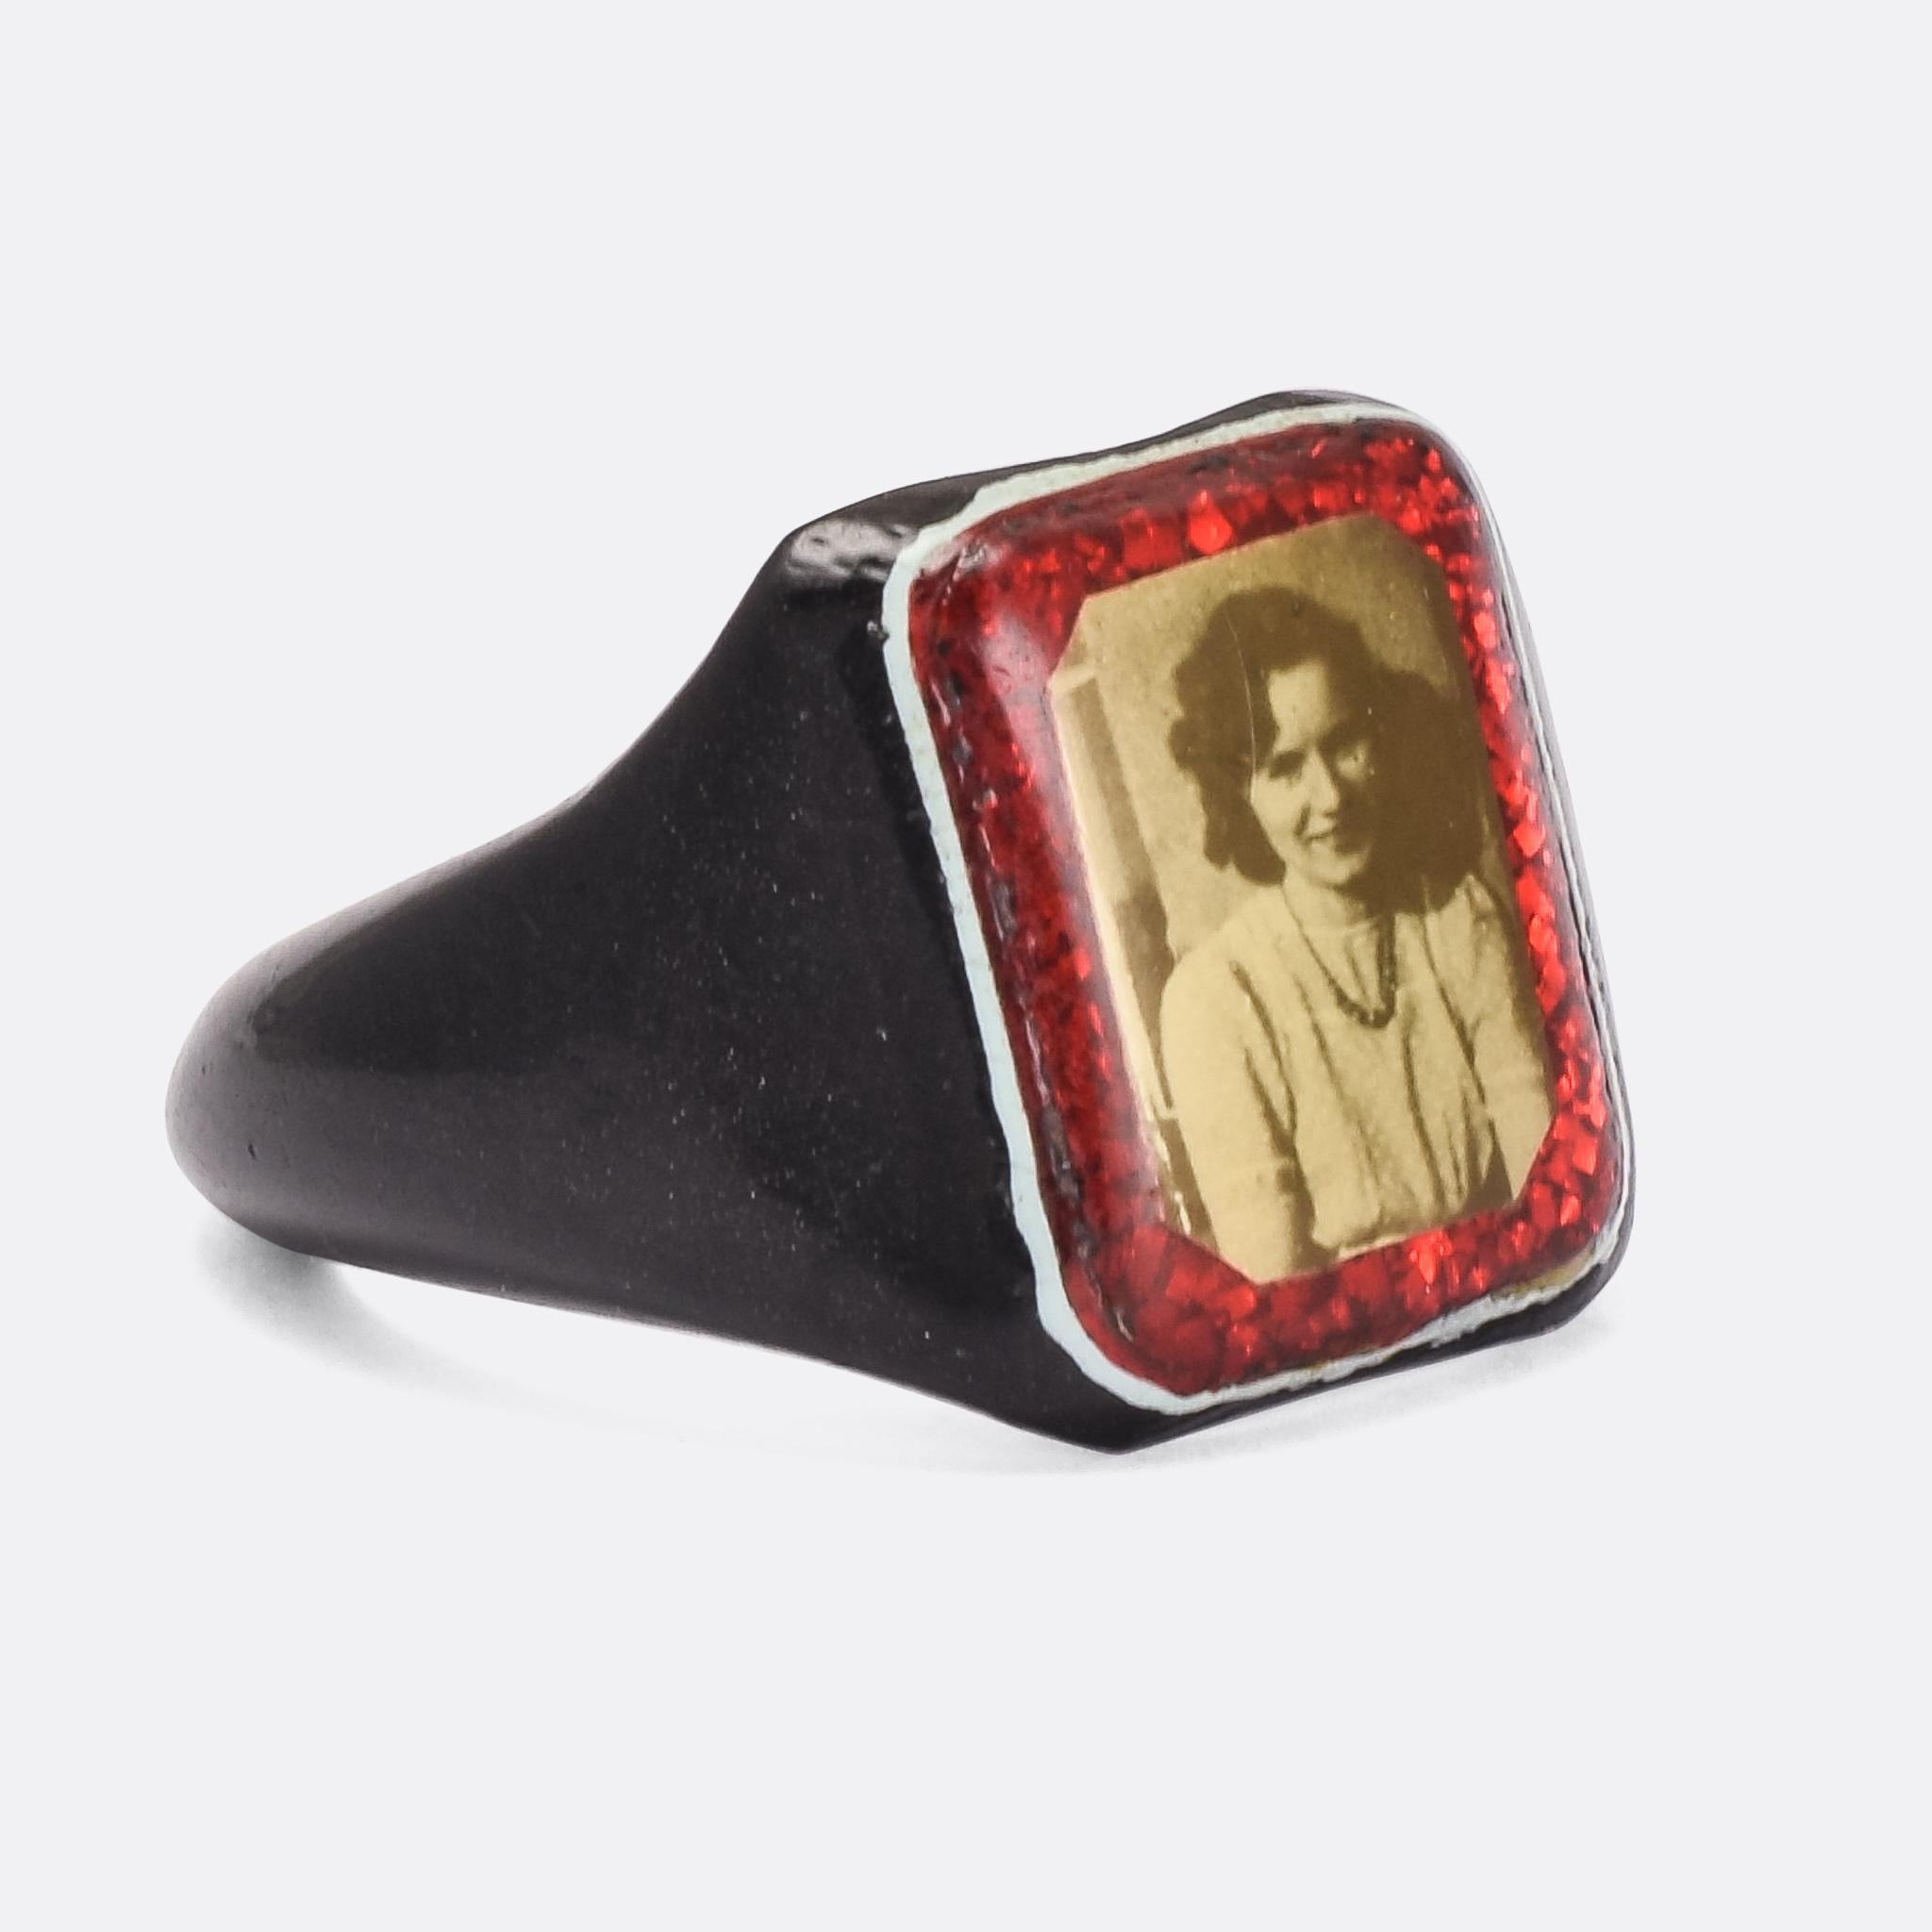 A 1940s Prison Ring crafted from celluloid and set on the face with a portrait photograph. These ring would have been made from whatever everyday items were available, toothbrushes or pens etc, and celluloid was preferred as it could be heat bonded